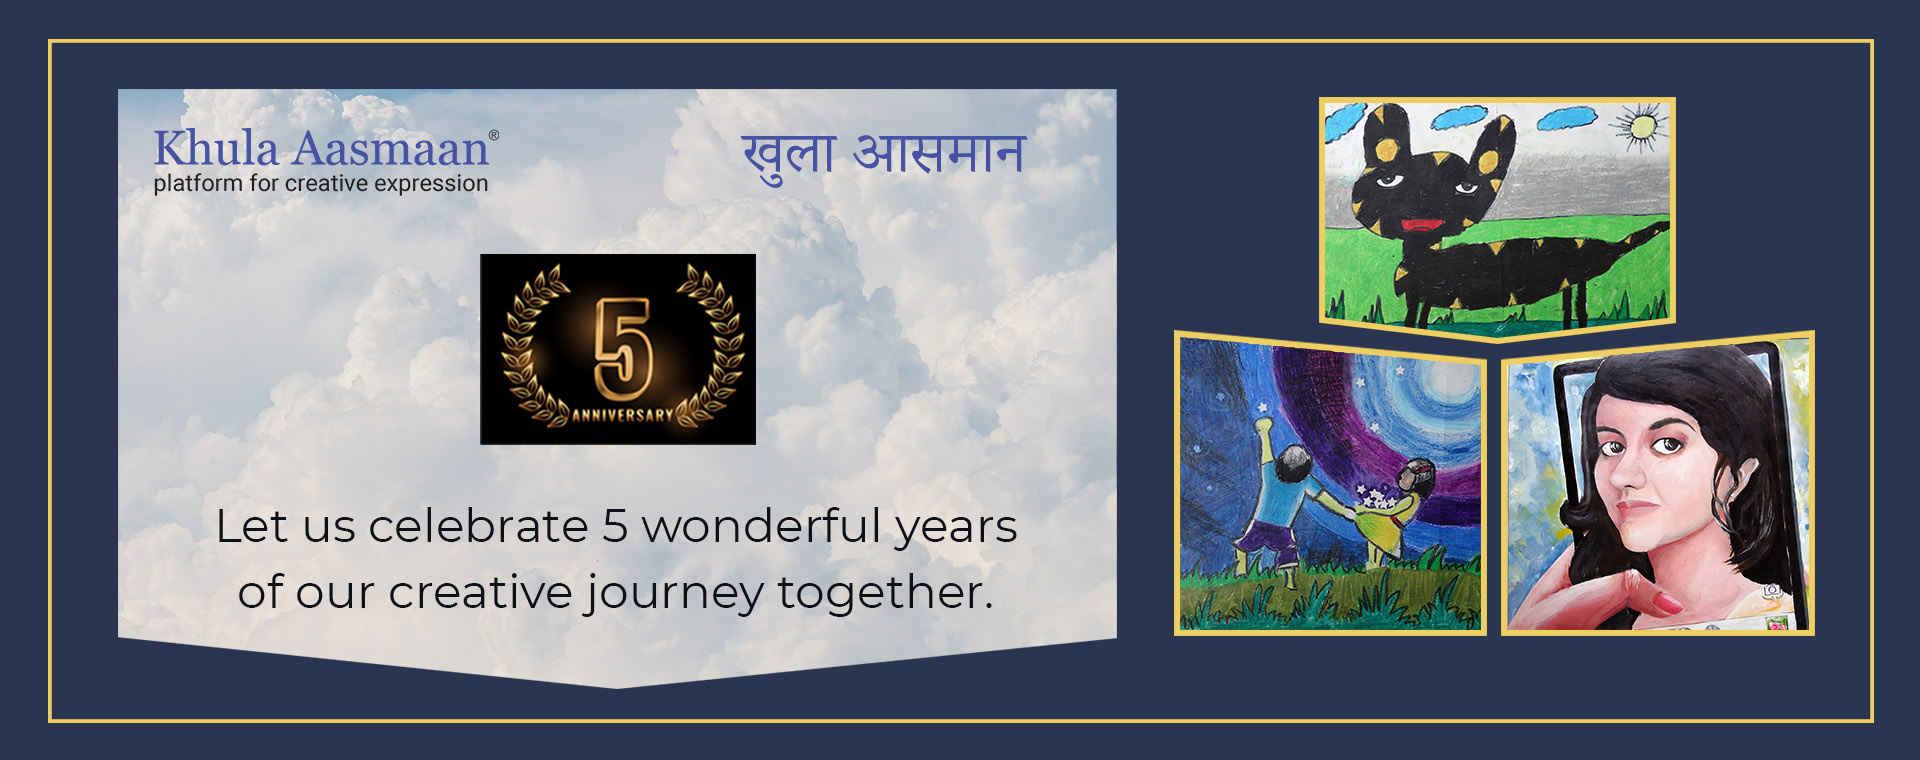 Let us celebrate 5 wonderful years of our creative journey